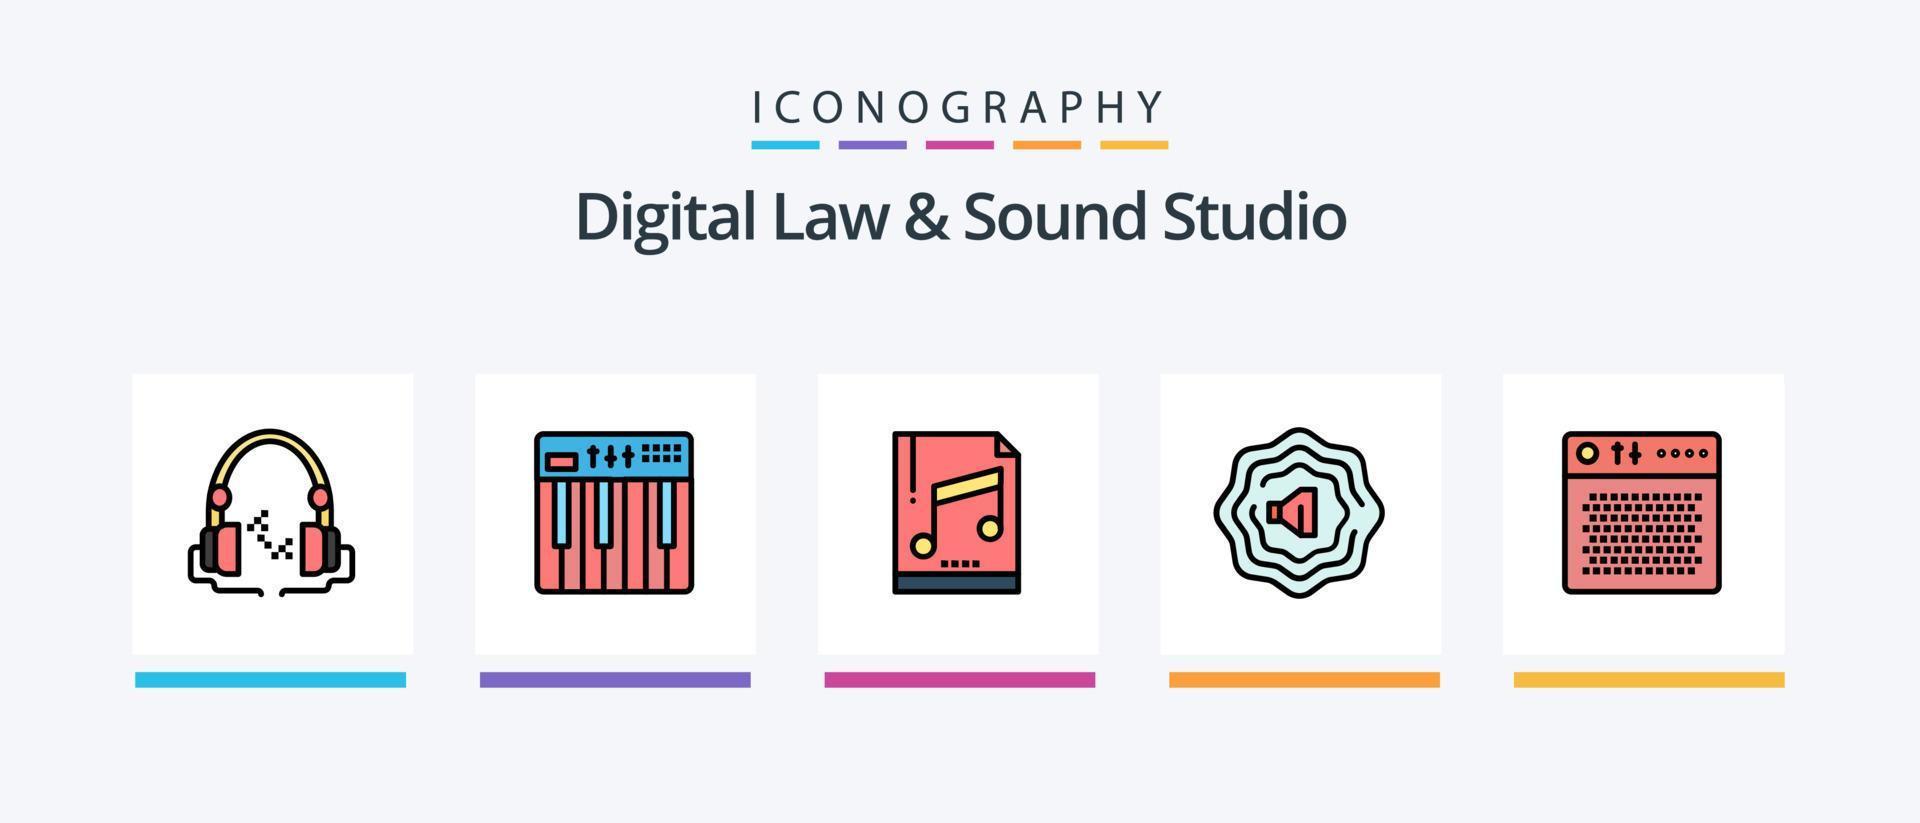 Digital Law And Sound Studio Line Filled 5 Icon Pack Including pressure. hertz. player. frequency. screen. Creative Icons Design vector